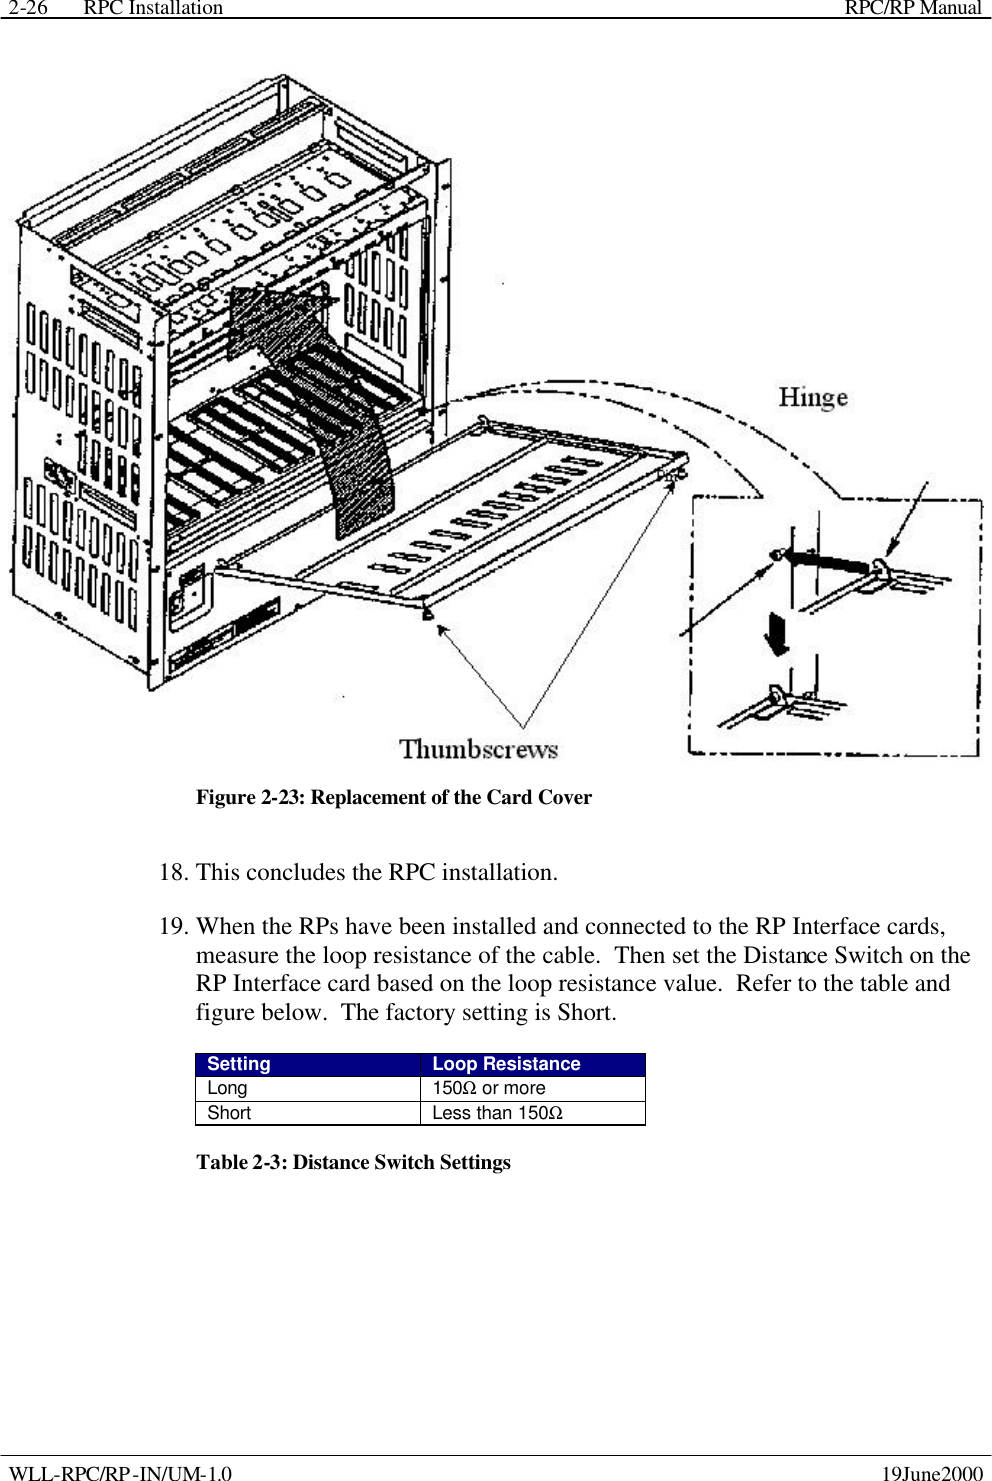 RPC Installation    RPC/RP Manual WLL-RPC/RP-IN/UM-1.0    19June2000 2-26 Figure 2-23: Replacement of the Card Cover 18. This concludes the RPC installation. 19. When the RPs have been installed and connected to the RP Interface cards, measure the loop resistance of the cable.  Then set the Distance Switch on the RP Interface card based on the loop resistance value.  Refer to the table and figure below.  The factory setting is Short. Setting Loop Resistance Long 150Ω or more Short Less than 150Ω Table 2-3: Distance Switch Settings 